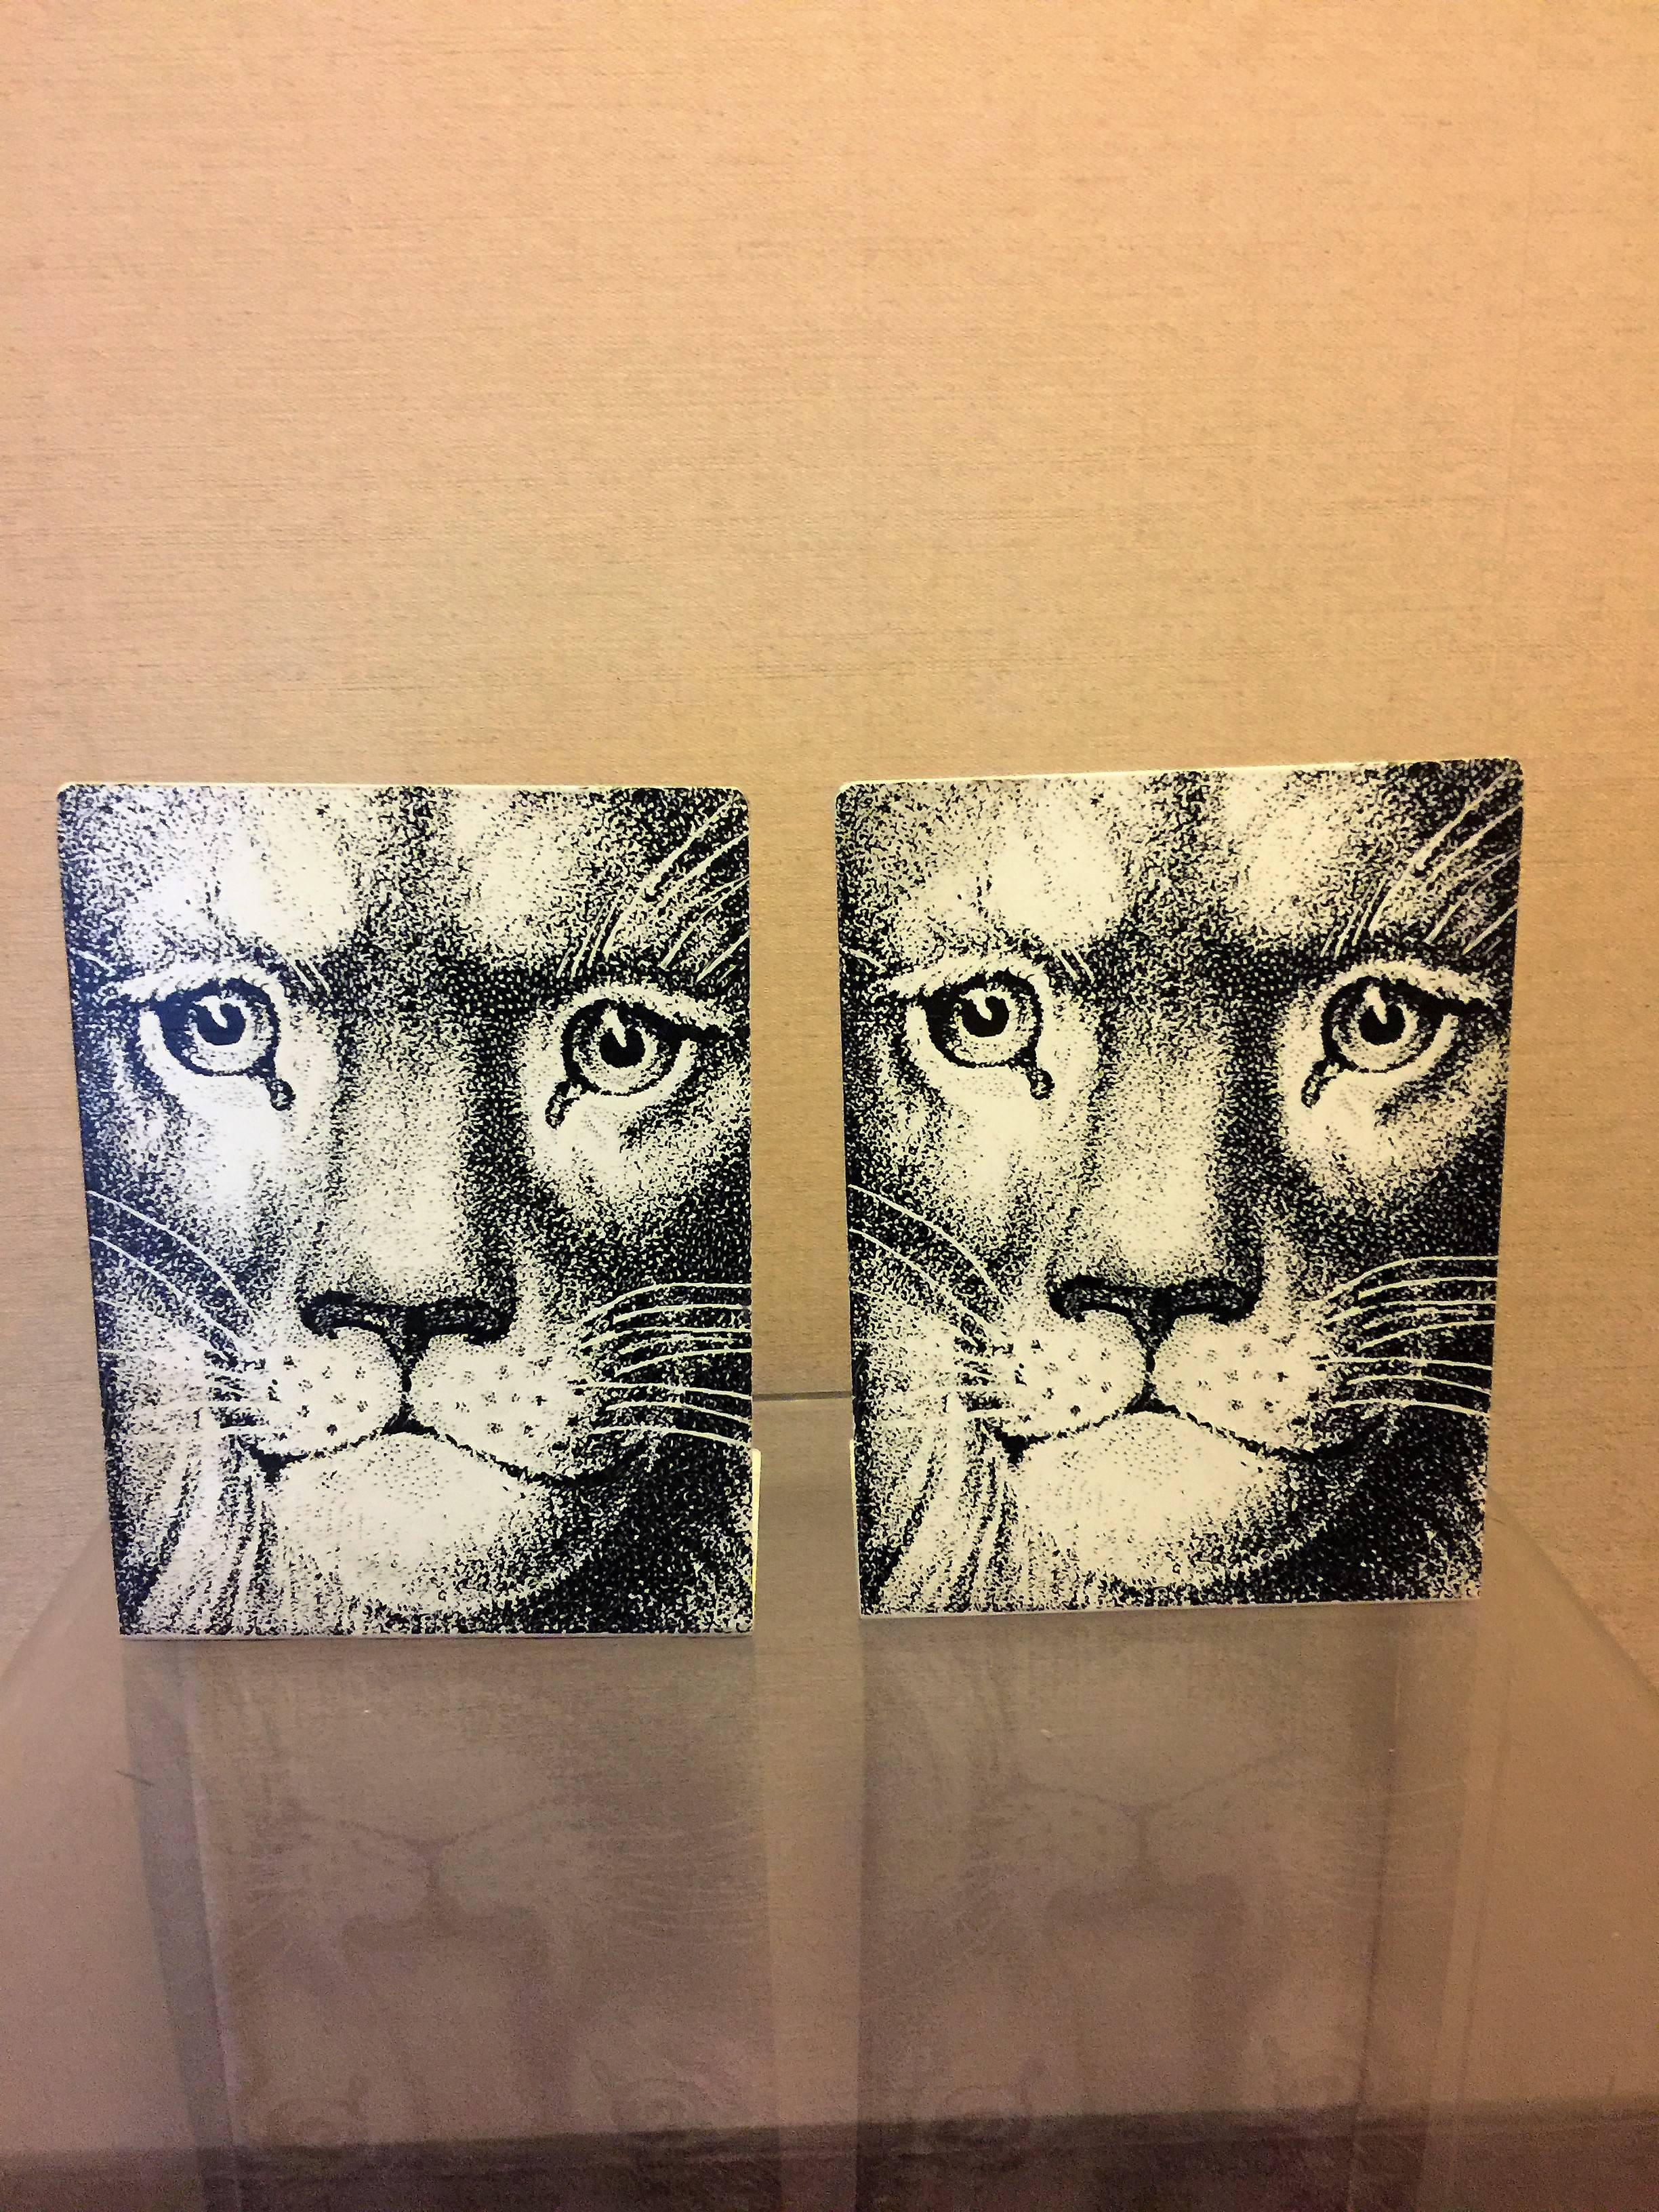 Dramatic pair of lion face black and white lithographed metal bookends by Italian visual master Piero Fornasetti.